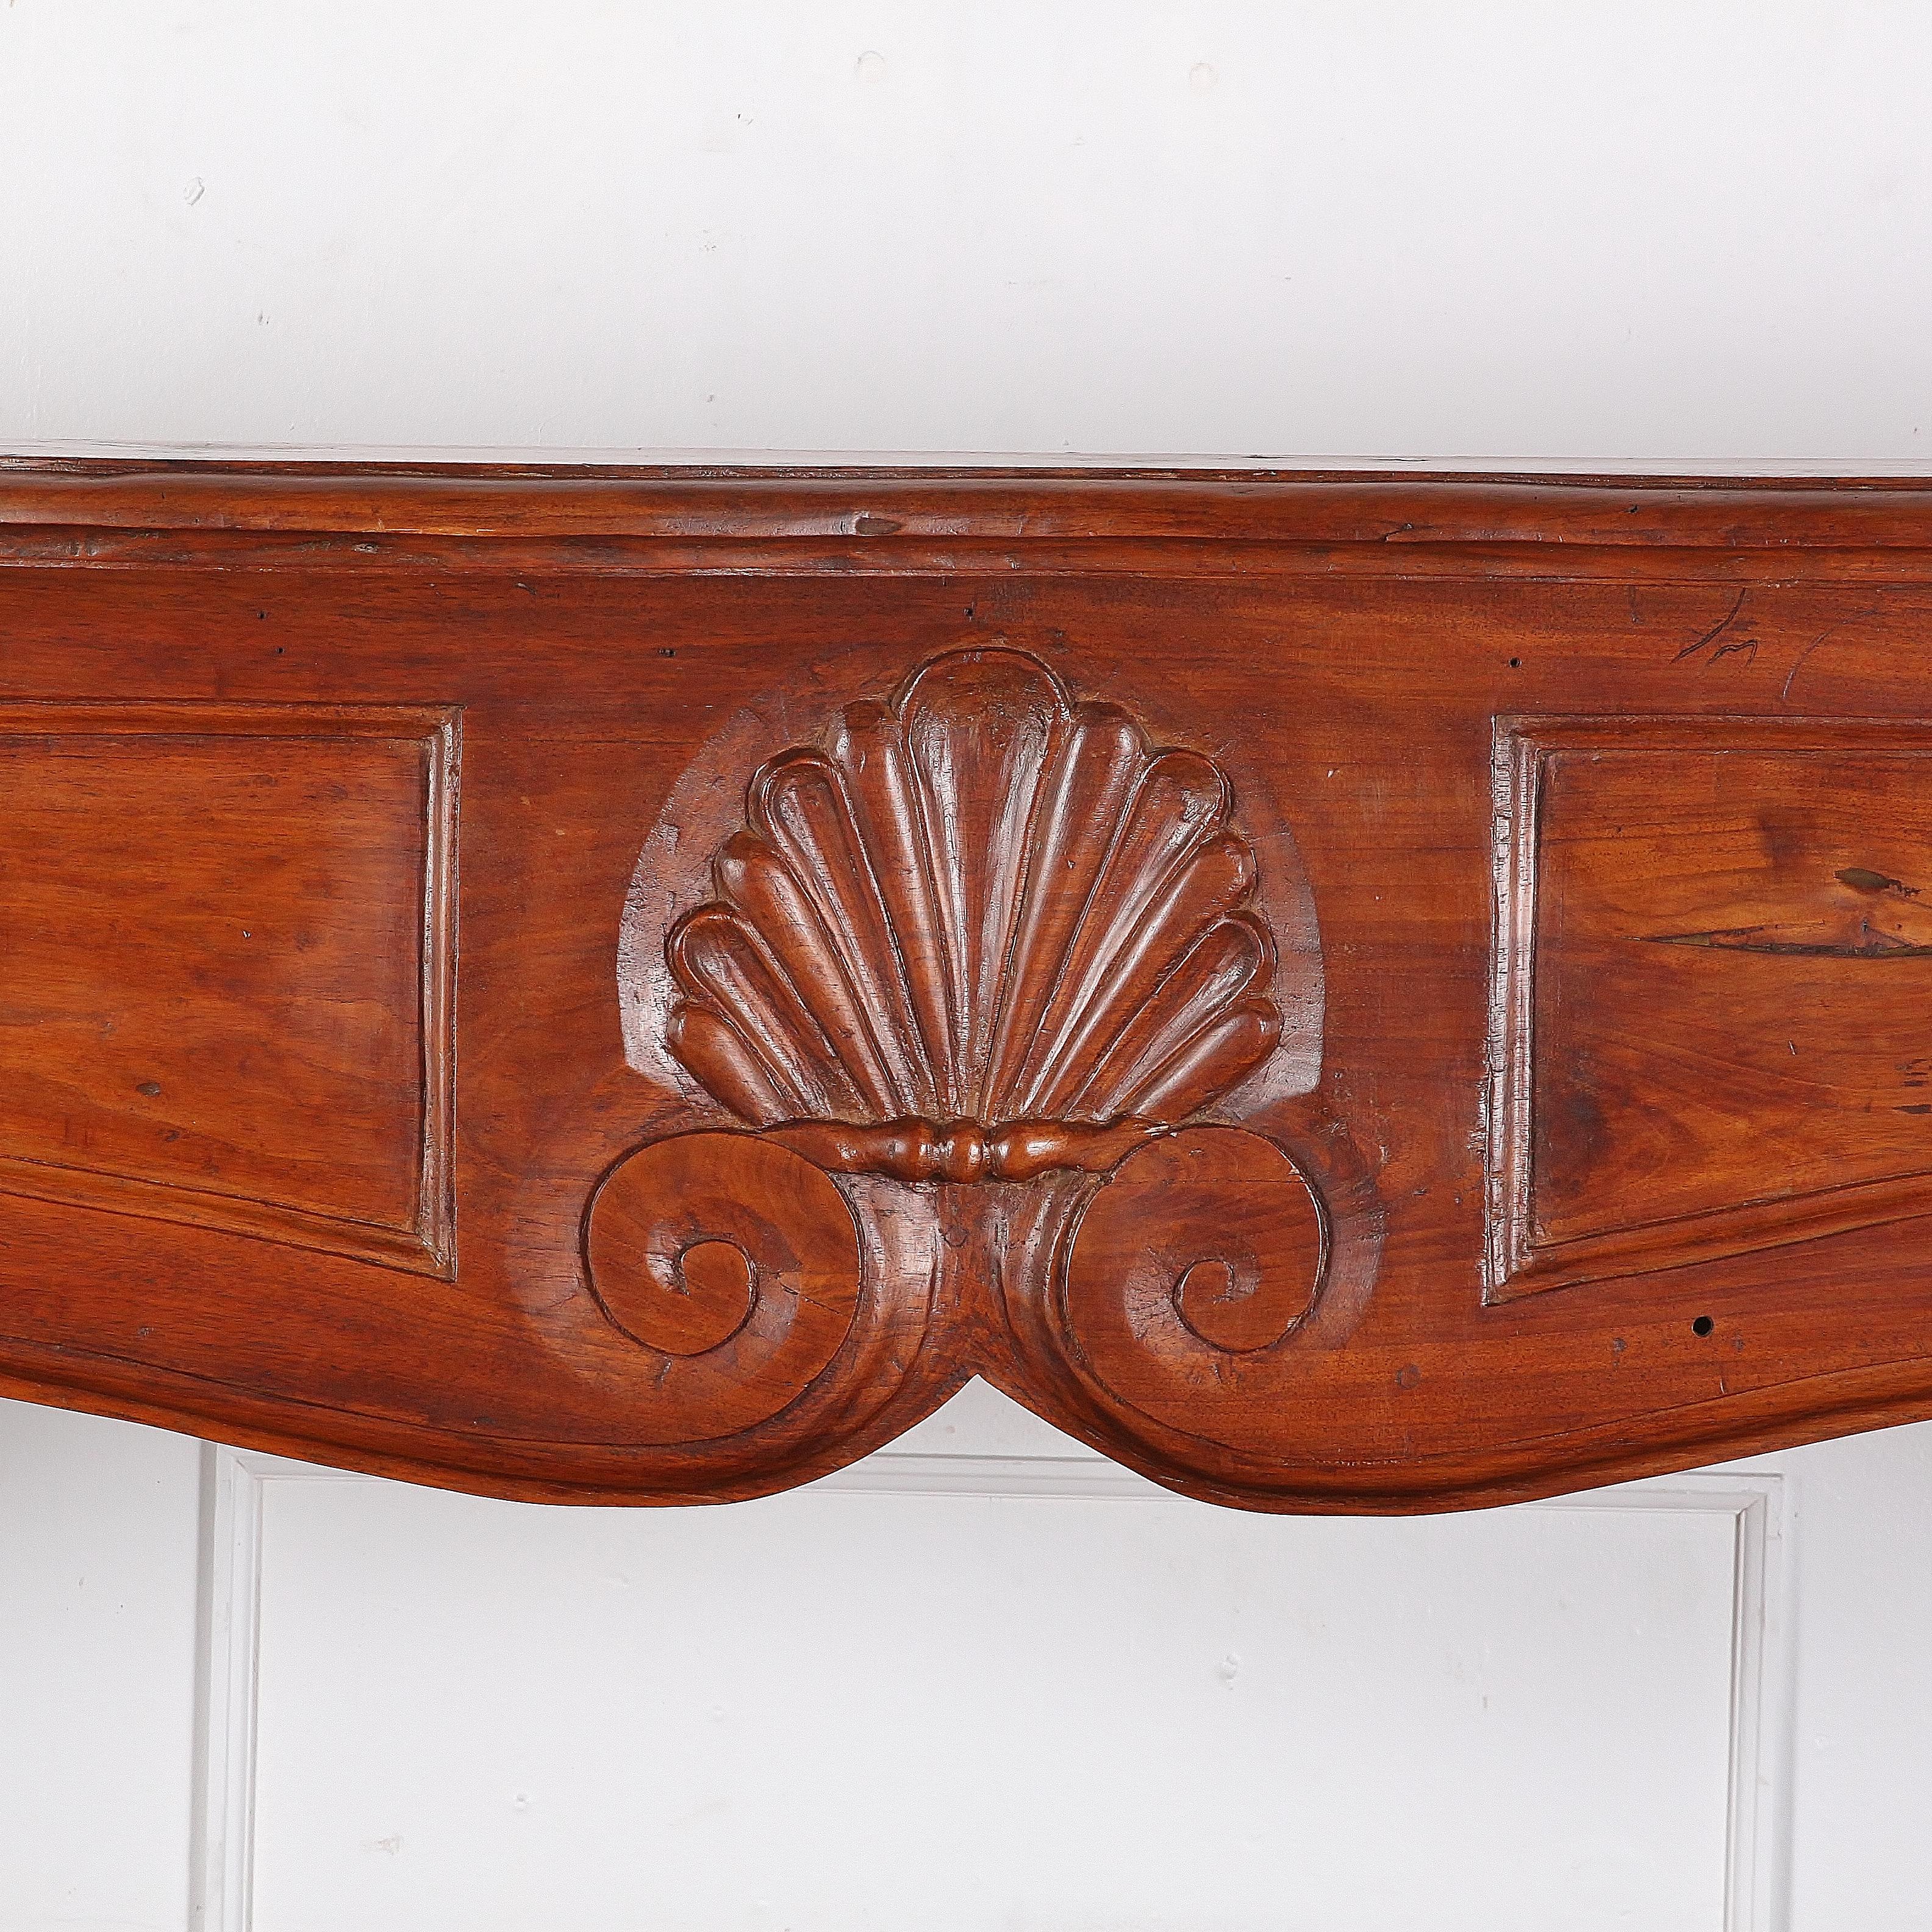 A large, 19th century, French solid fruitwood mantel (fireplace) with Louis XV-style carved details.

The piece has been modified to serve as a bookcase with the addition of some shelves but these are easily removed. 

 